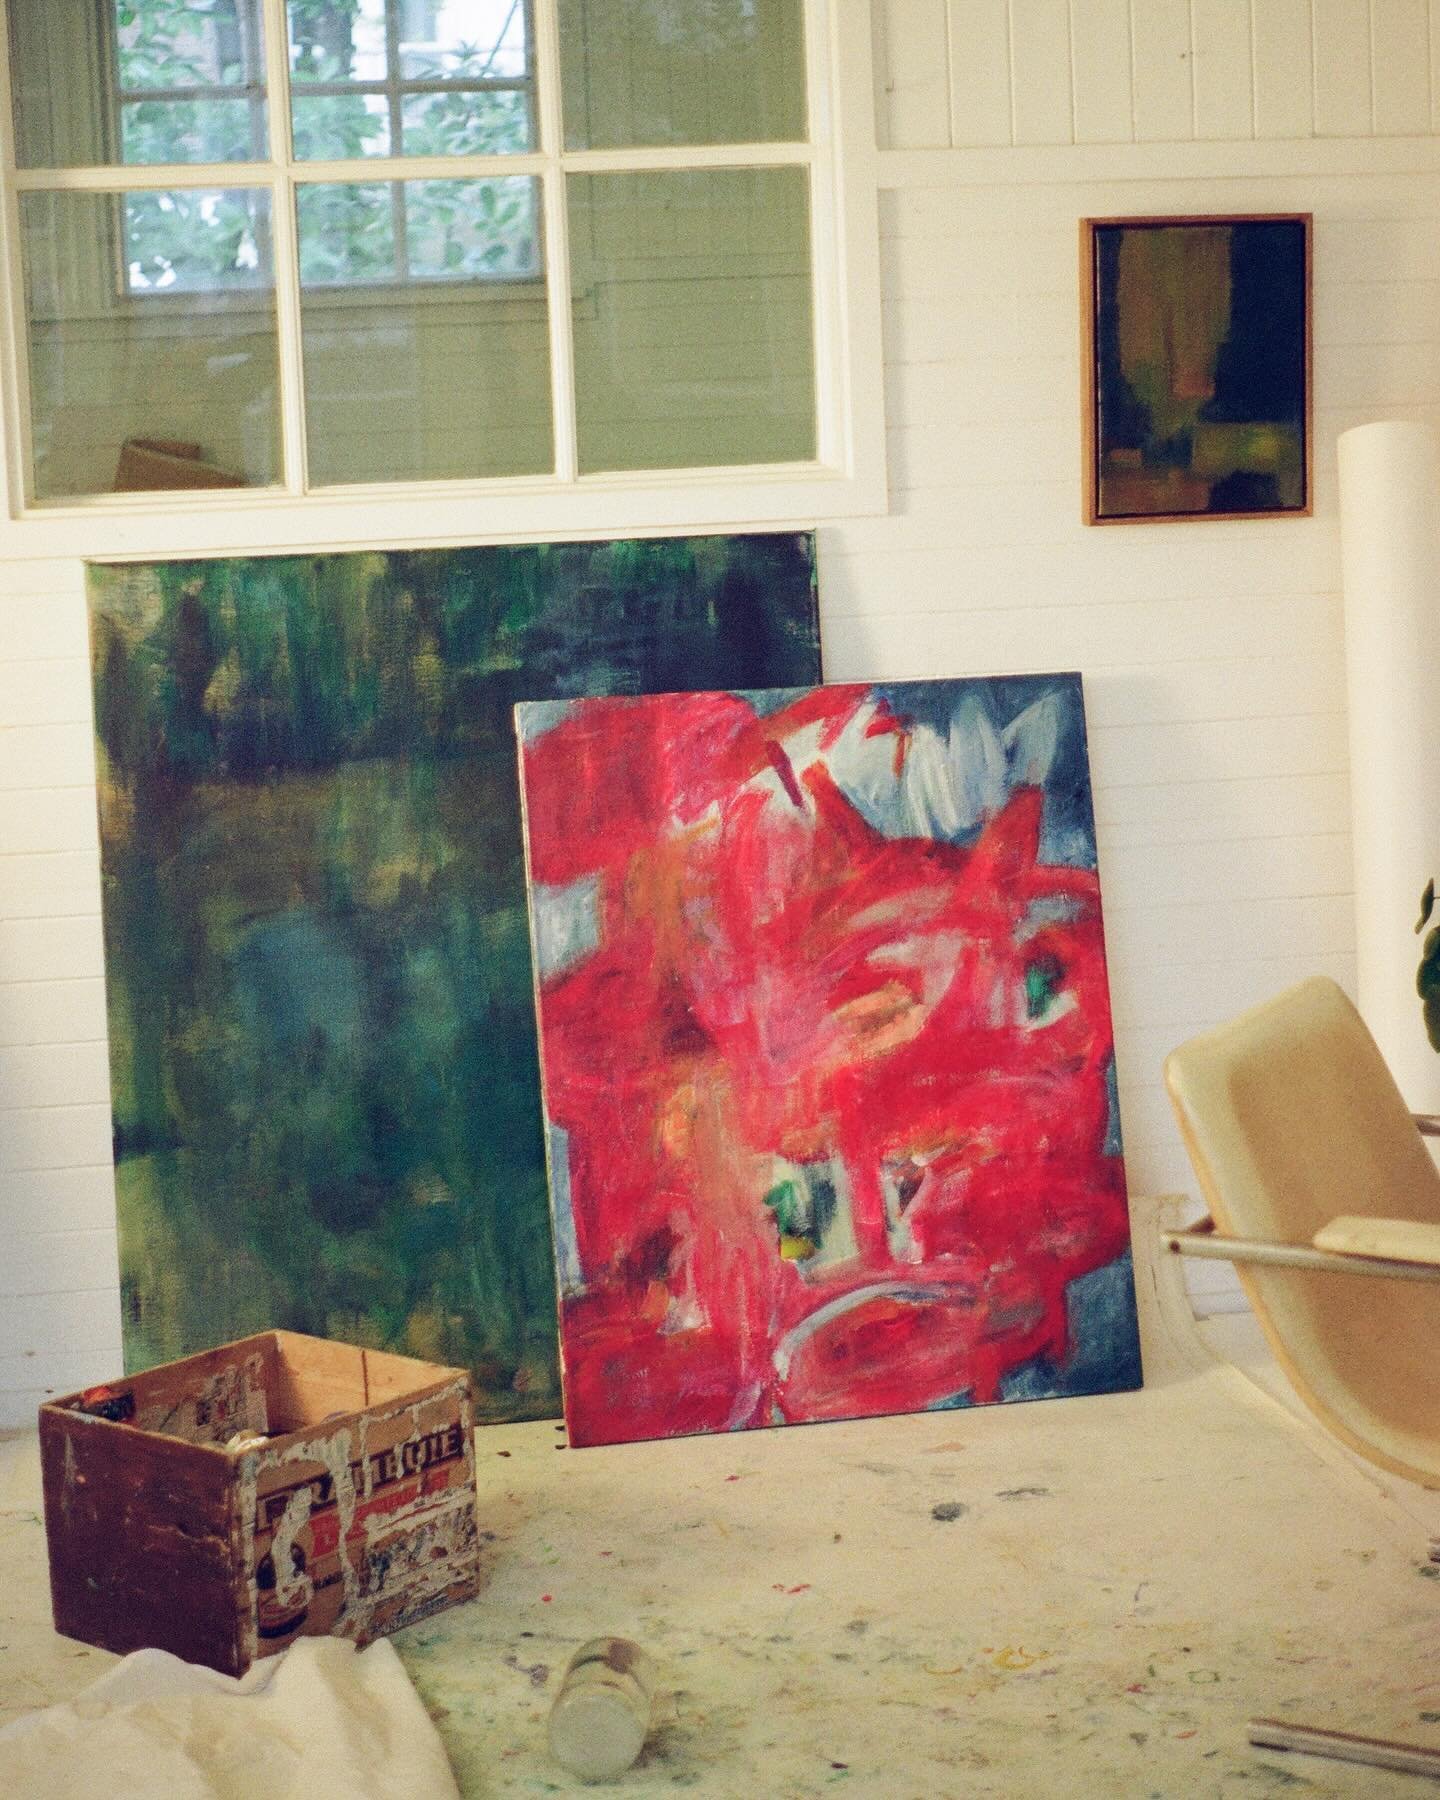 Playing with more reds lately, and it&rsquo;s really growing on me 🍄
Studio December 2023 by @nadinemrb 
.
.
.
.
#colorfulart #modernekunst #artstudio #abstractlovers #contemporaryartcollector #newandabstract #redpainting #creativespace #studioview